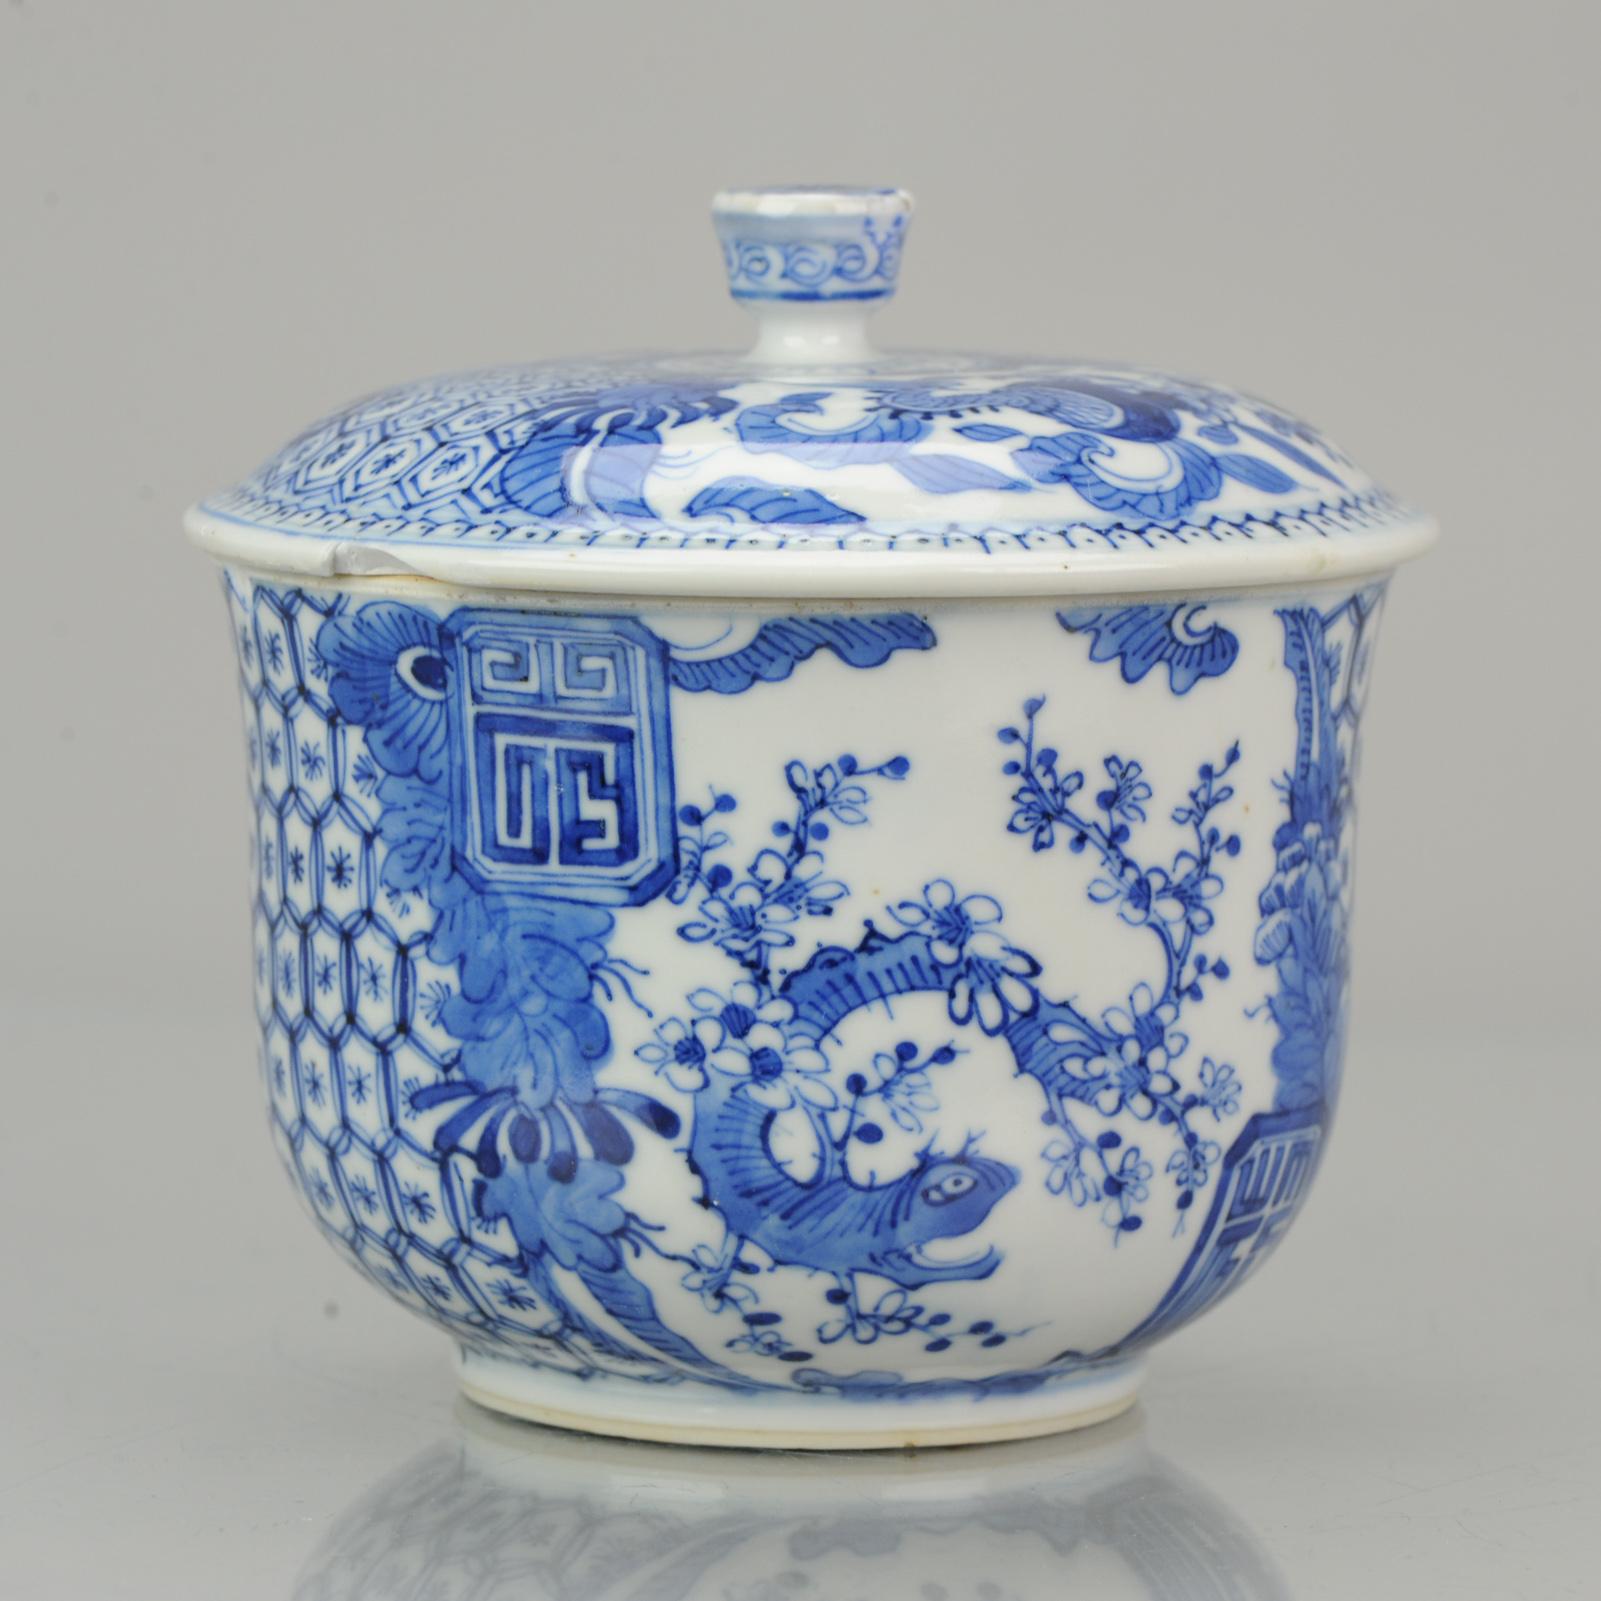 Description
Large Chinese porcelain lidded jar decorated in blue. The cobalt is absolutely amazing. Called Hue Blue for the Vietnamese market. Round shape decorated with flowers, trees, pomegranates and symbols. !!Please note the animal faces that